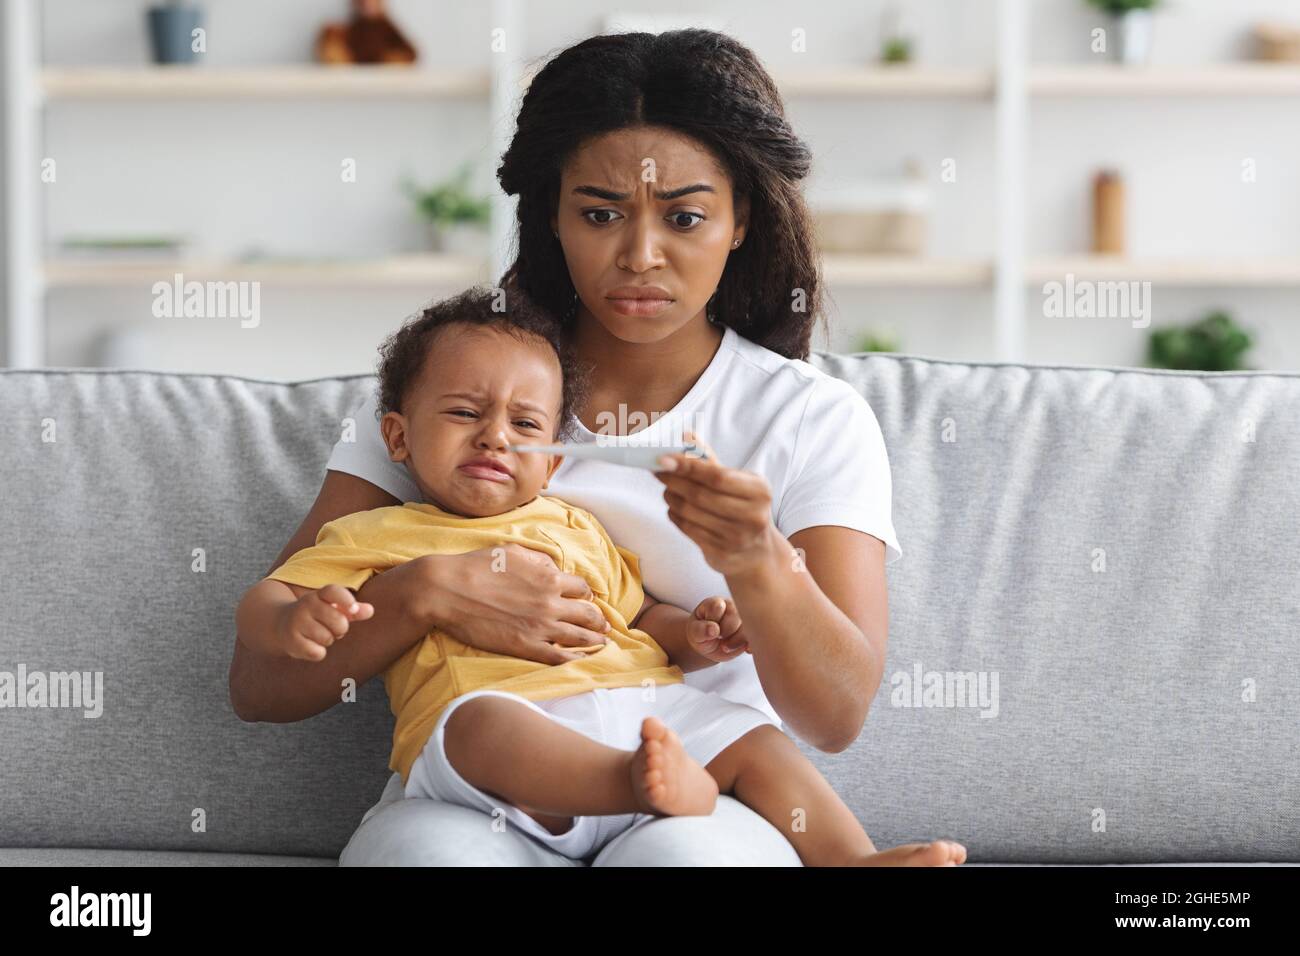 Worried Black Mother Checking Temperature Of Her Crying Infant Baby At Home Stock Photo